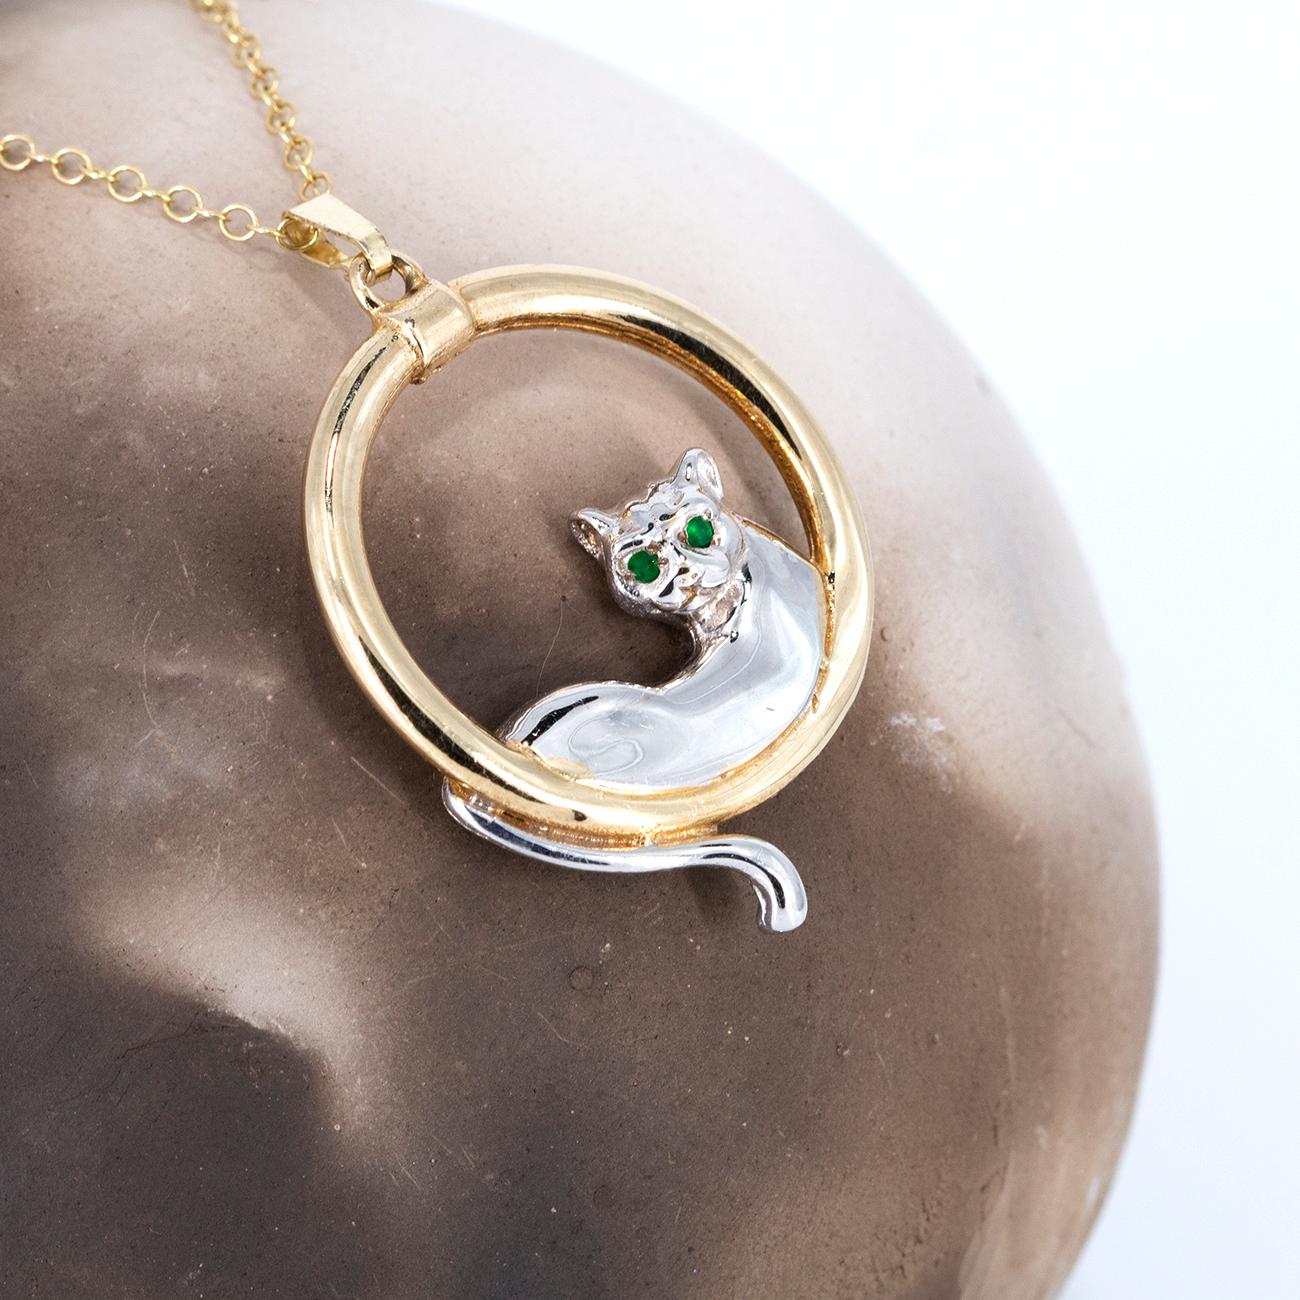 This languid cat is lying down , highlighted in white rhodium on top of the solid 9k gold. All cat lovers will identify with this sensuous feline at one with the world.
Simon has used a beautiful pair of emeralds as the eyes and the pendant is